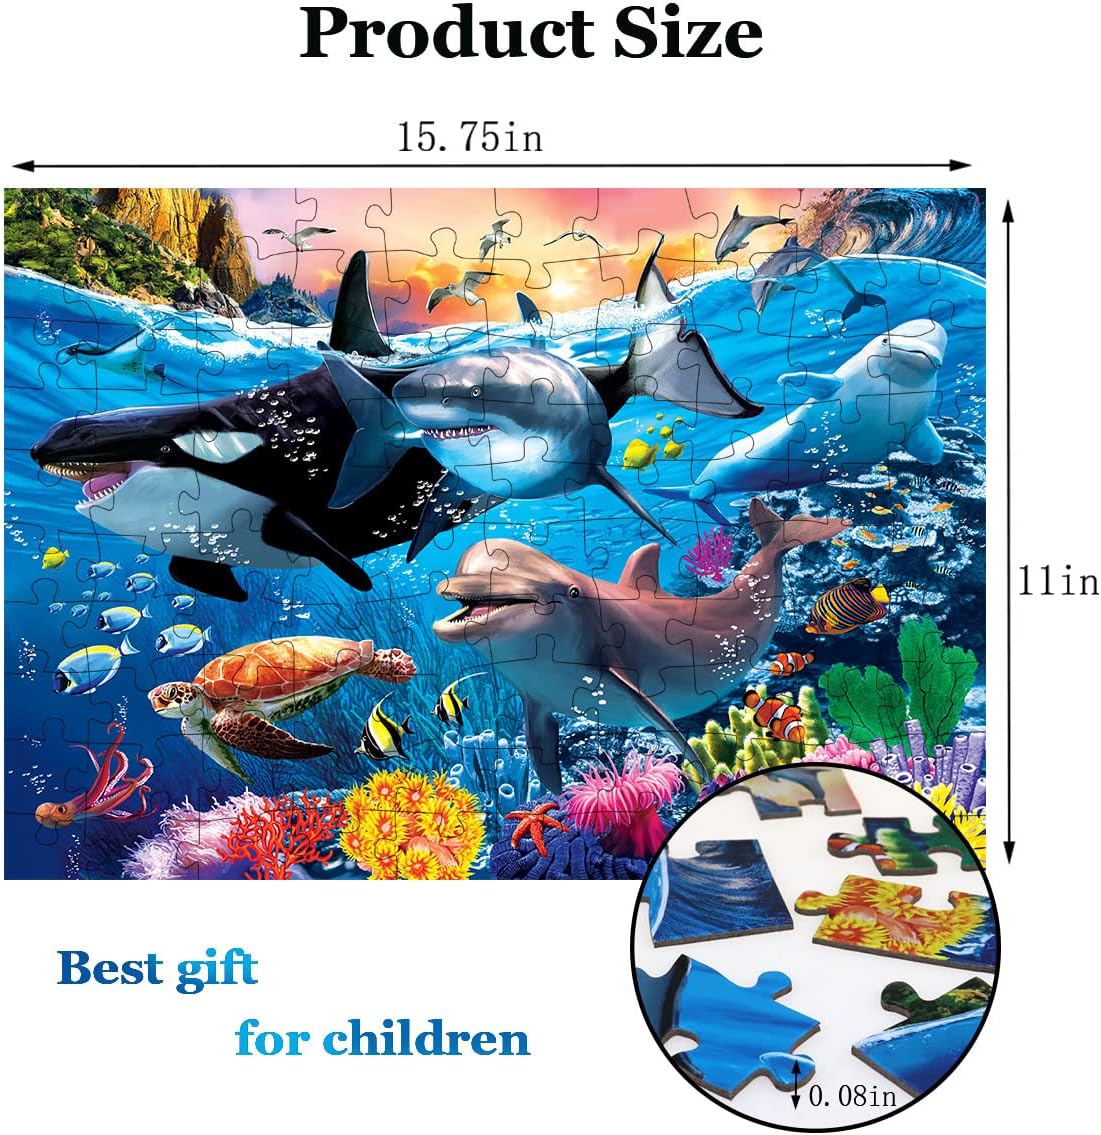 Puzzles for Kids Ages 4-8 Year Old - Underwater World: A Fun and Educational Toy Review